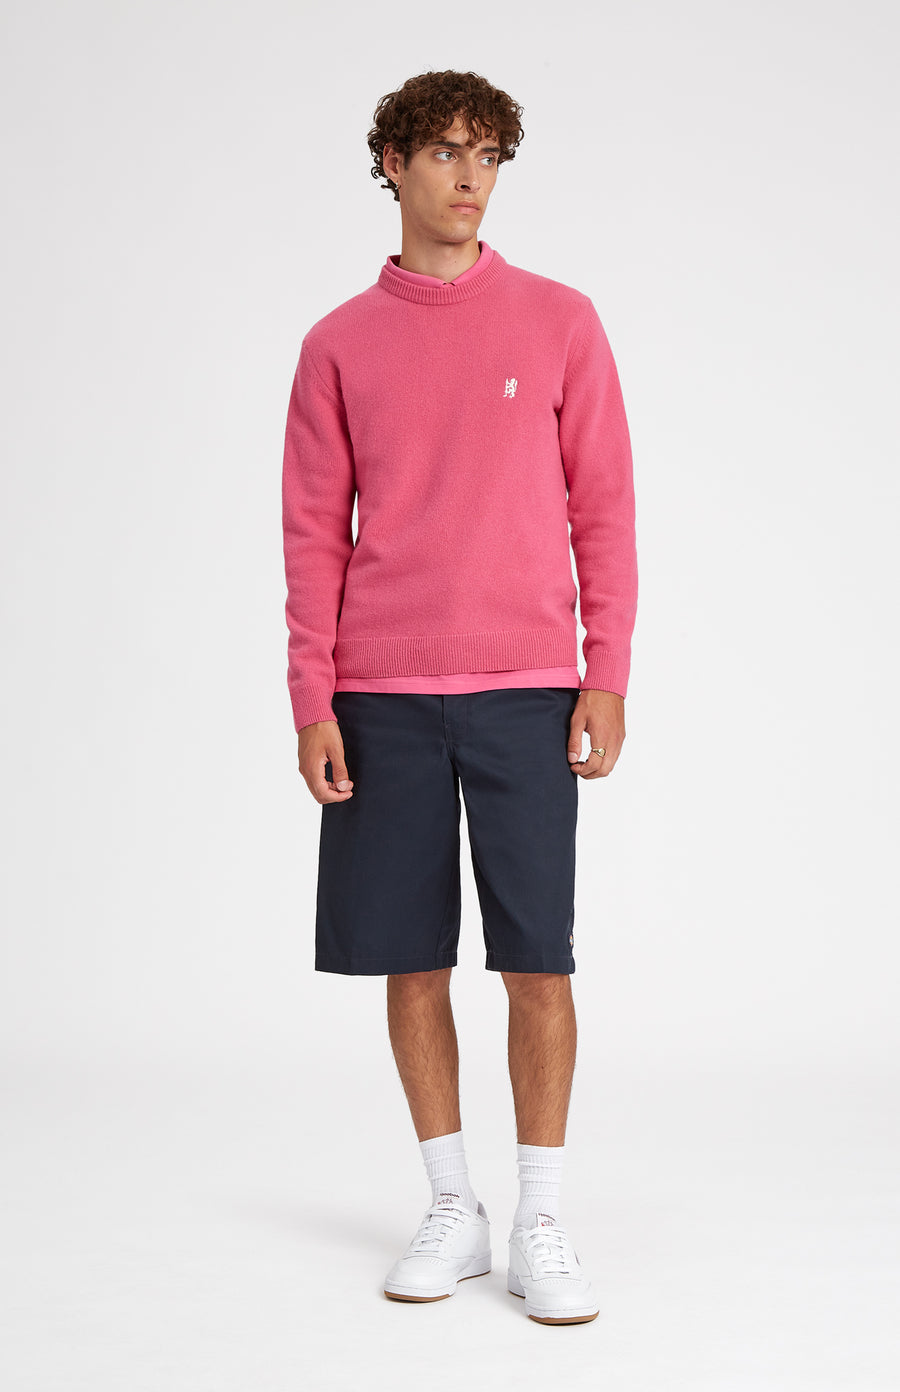 Round Neck Lambswool Golf Jumper In Heather Pink on male model full length - Pringle of Scotland